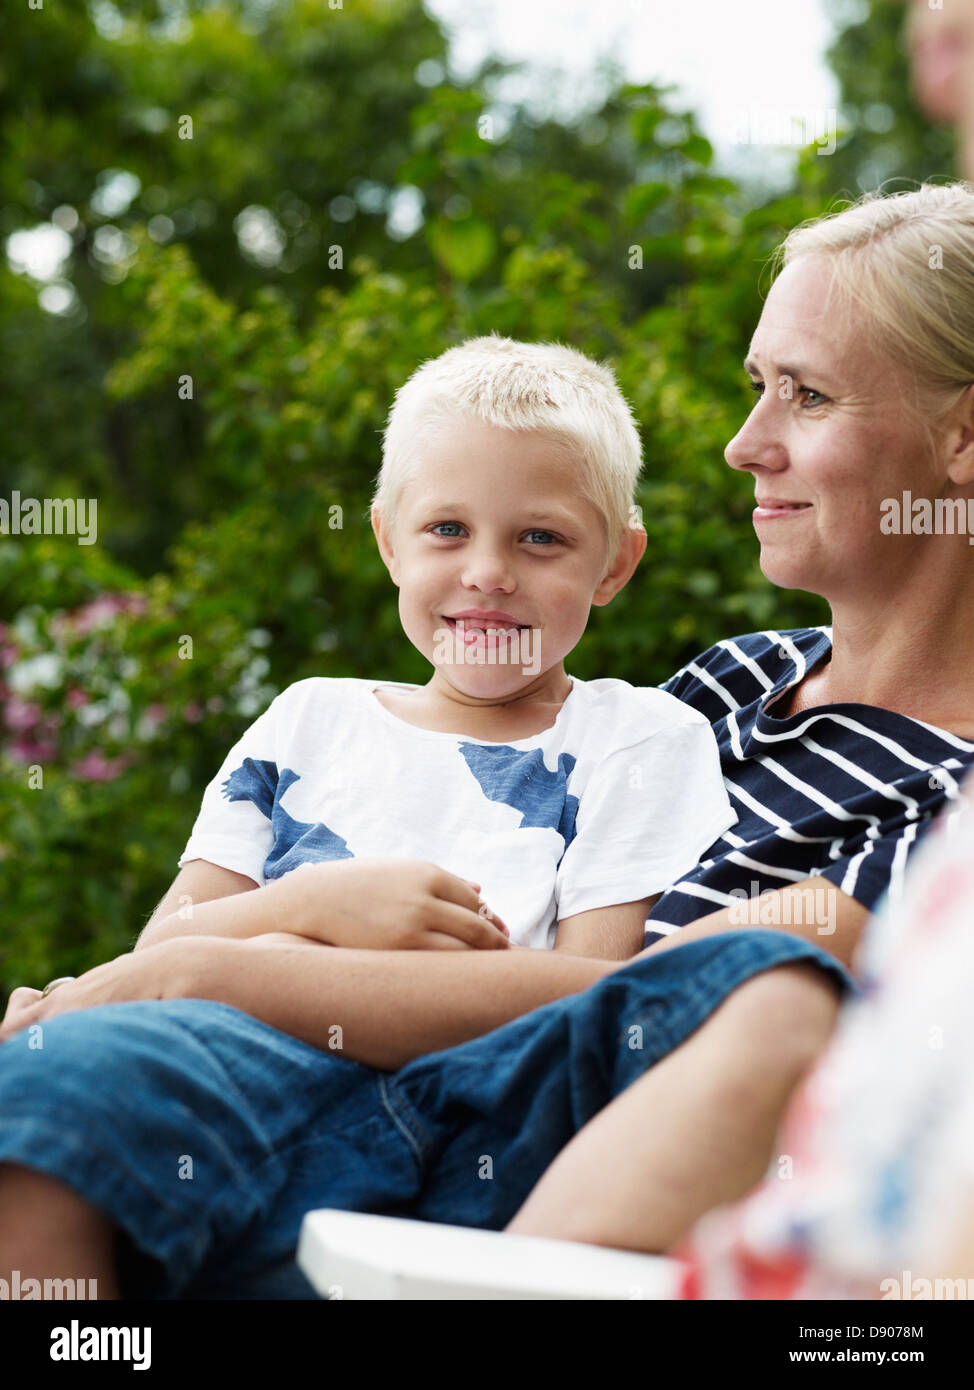 Mother and boy sitting in outdoor chair Stock Photo